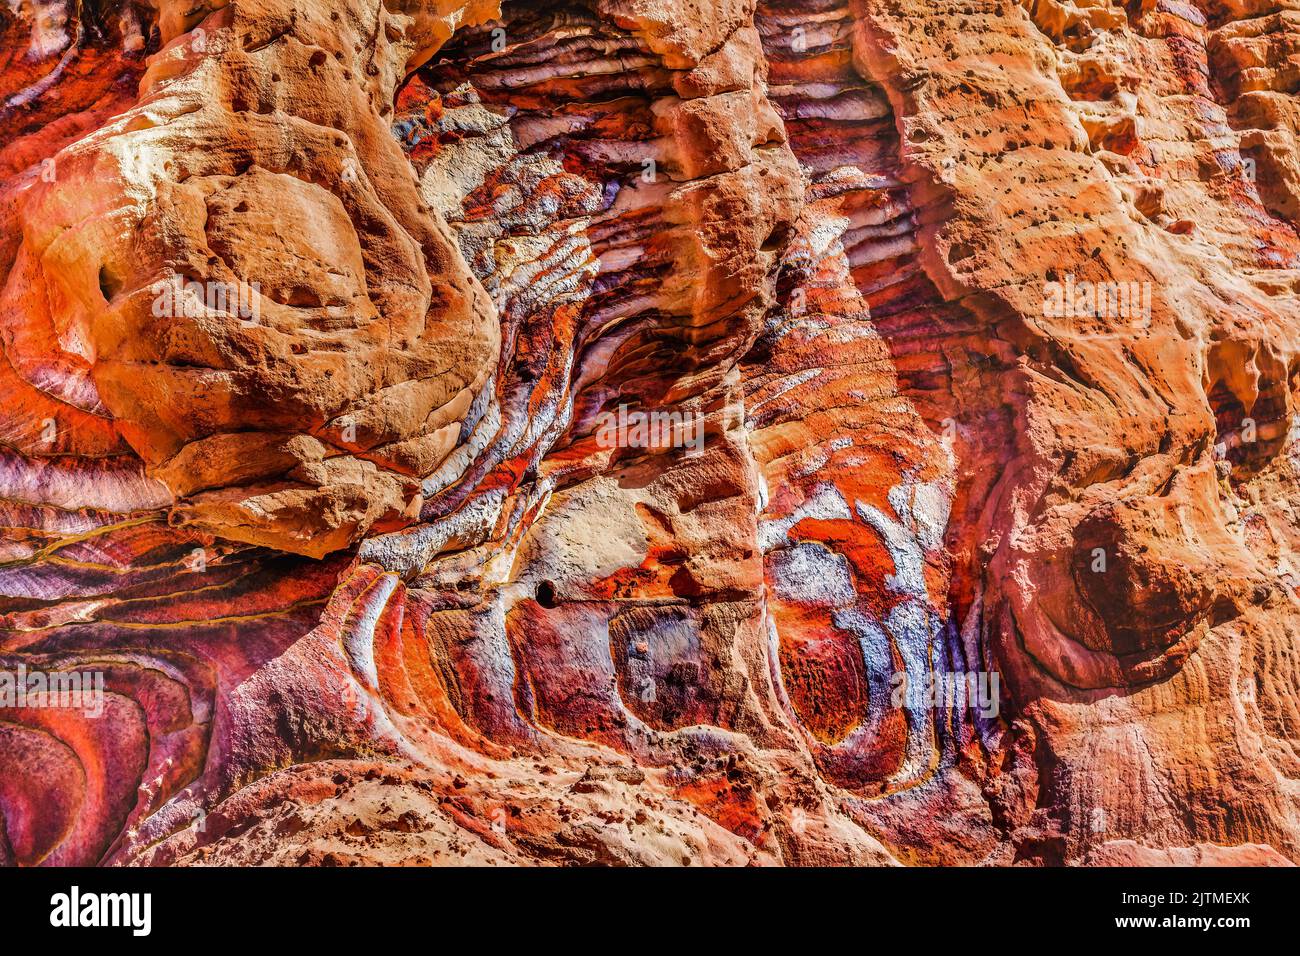 Red Rock Abstract Petra Jordan Built by Nabataens in 200 BC to 400 AD Red canyon walls create many abstracts close up Stock Photo